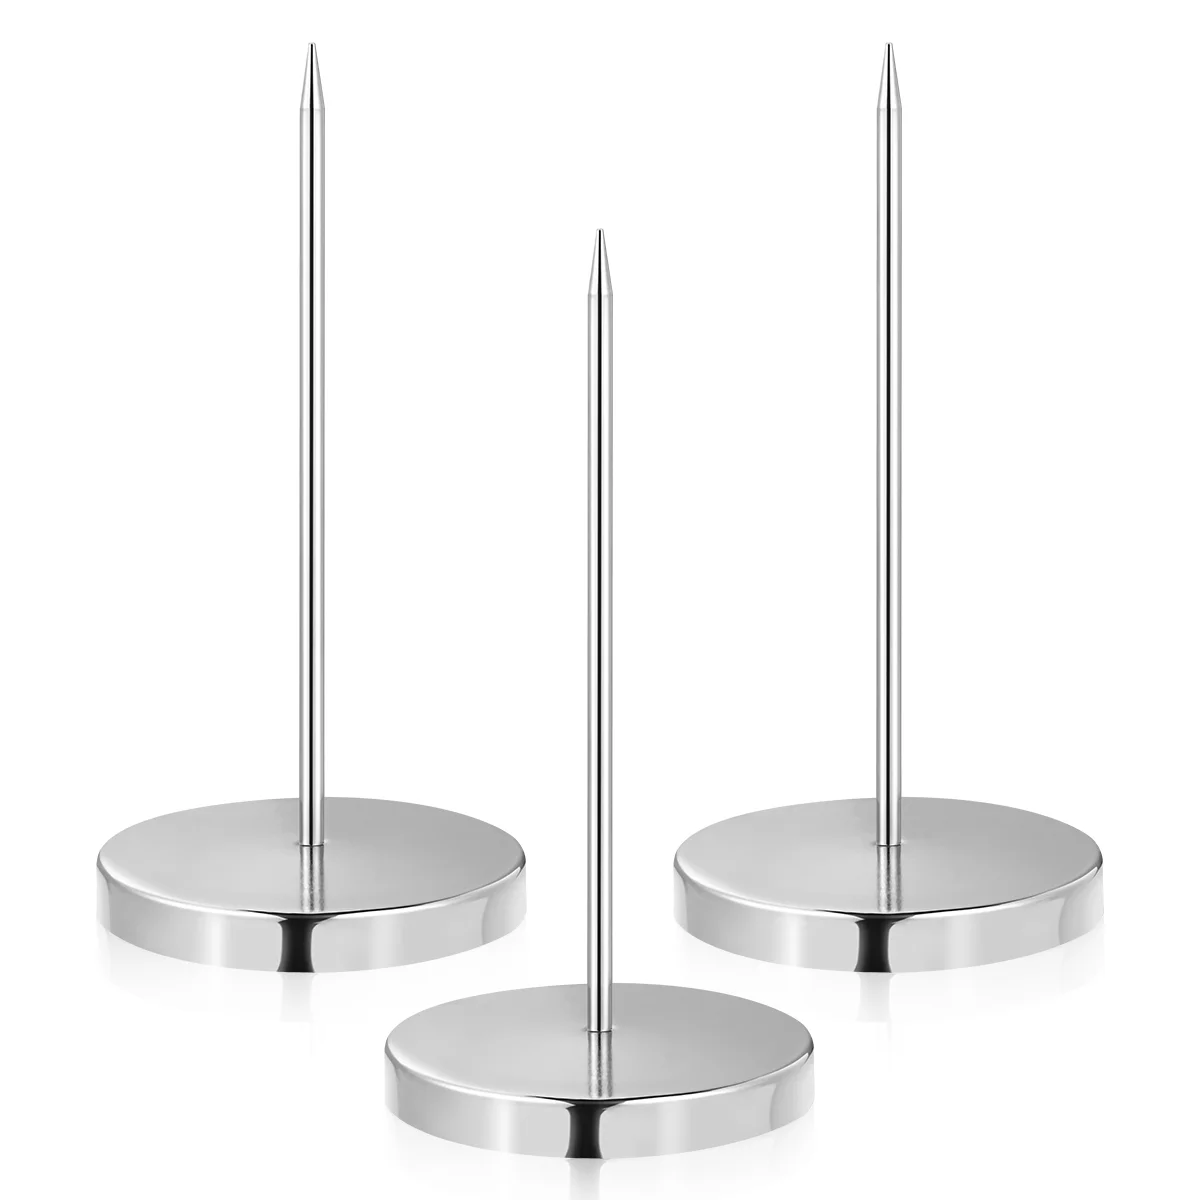 

Toyvian 3 Pcs Desk Check Spindle Holder Metal Bill Holder with Round Base and Thick Spindle Rod for Restaurant Kitchen Office